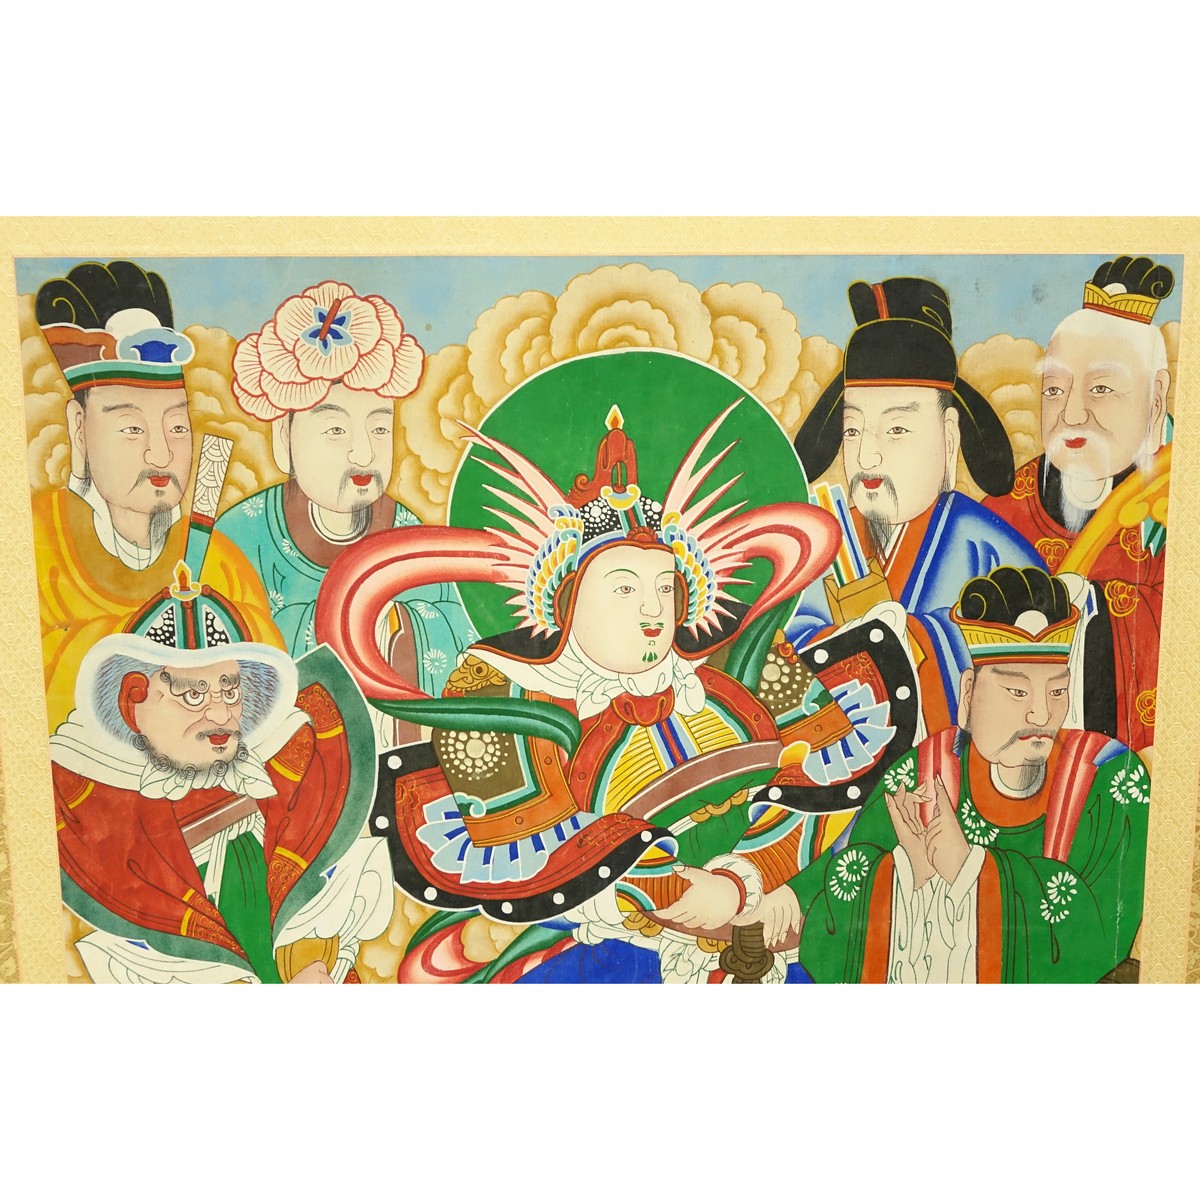 A Chinese Silk Scroll Painting, Several Standing Warrior and Scholar Figures. Good condition.